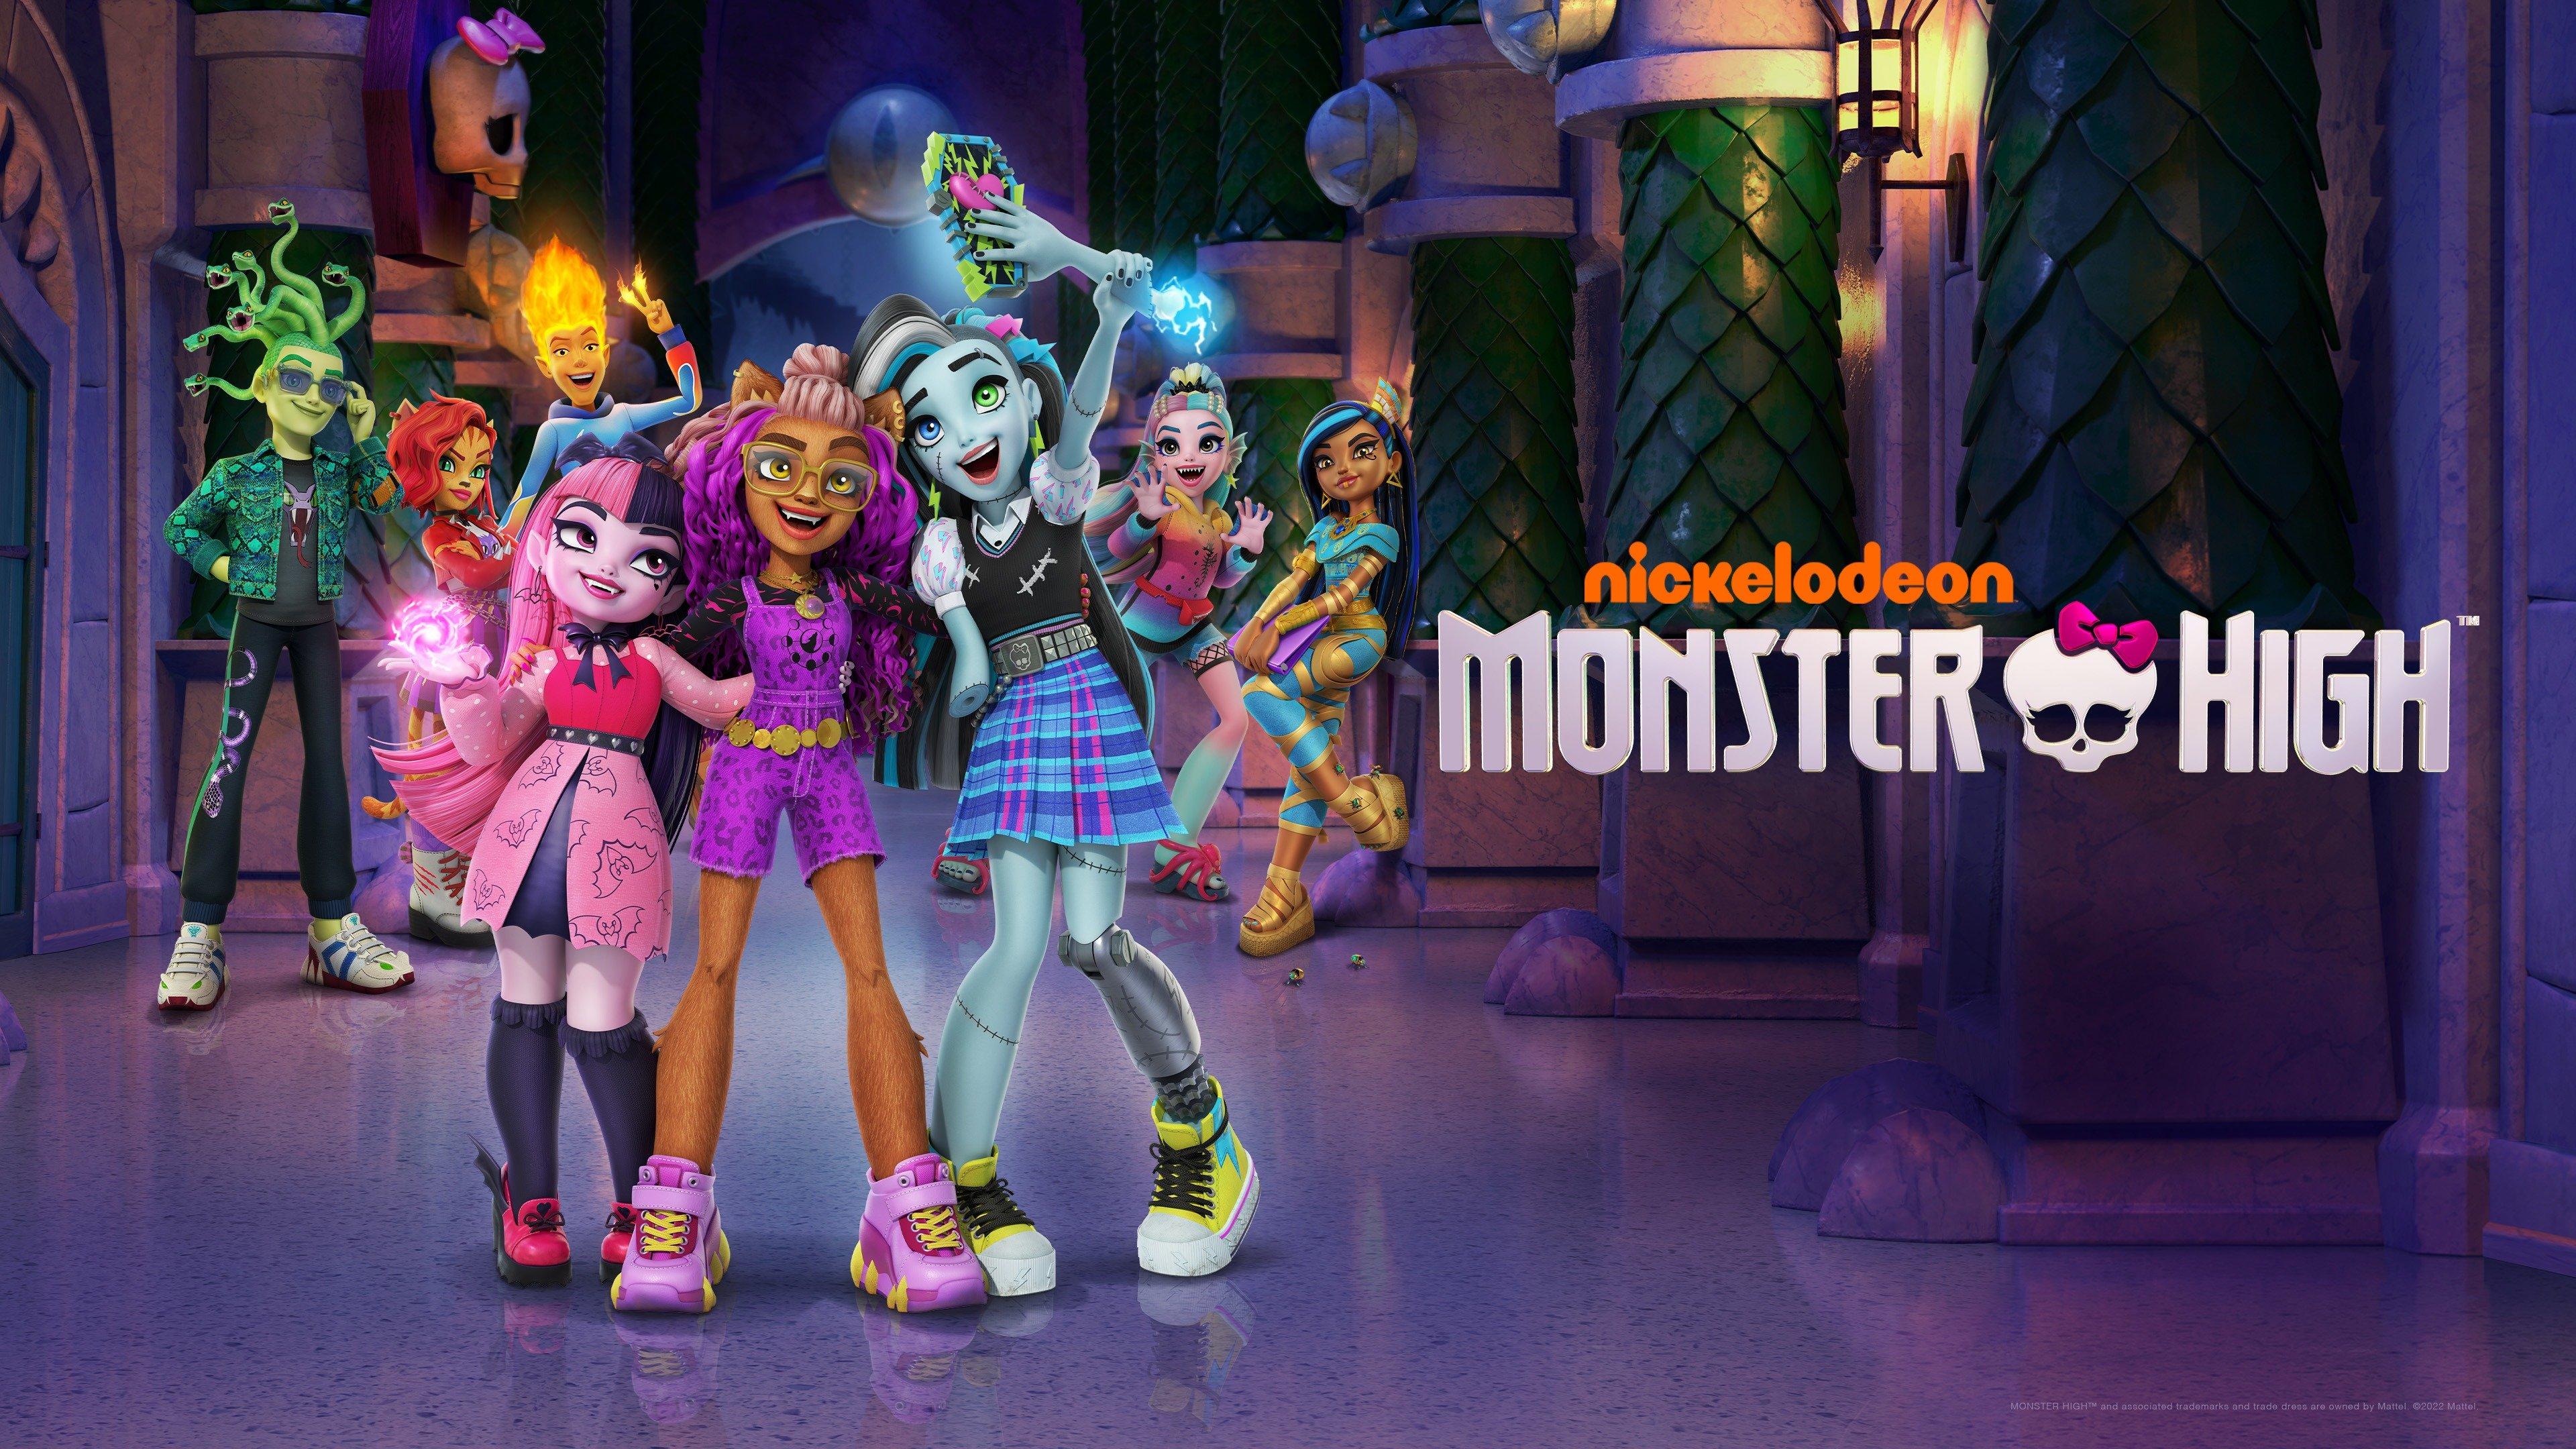 Watch Monster High Streaming Online on Philo (Free Trial)